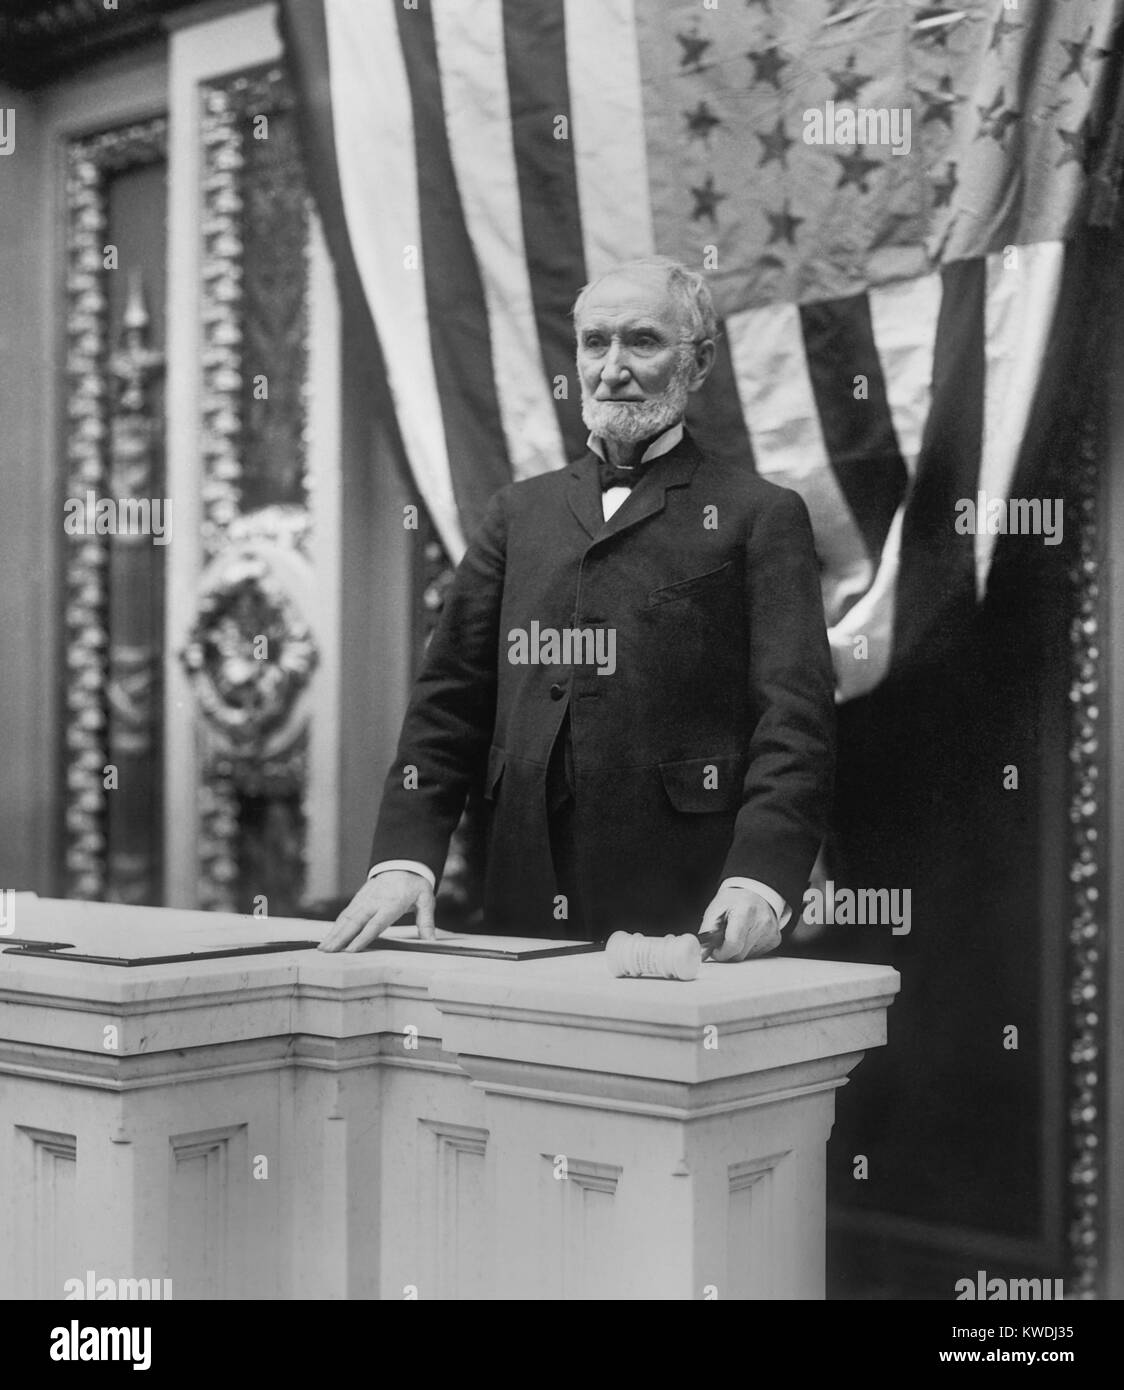 Joseph Cannon, Republican Speaker of the House from 1903 to 1911. He is standing at the House of Representatives Speakers Rostrum (BSLOC 2017 8 86) Stock Photo